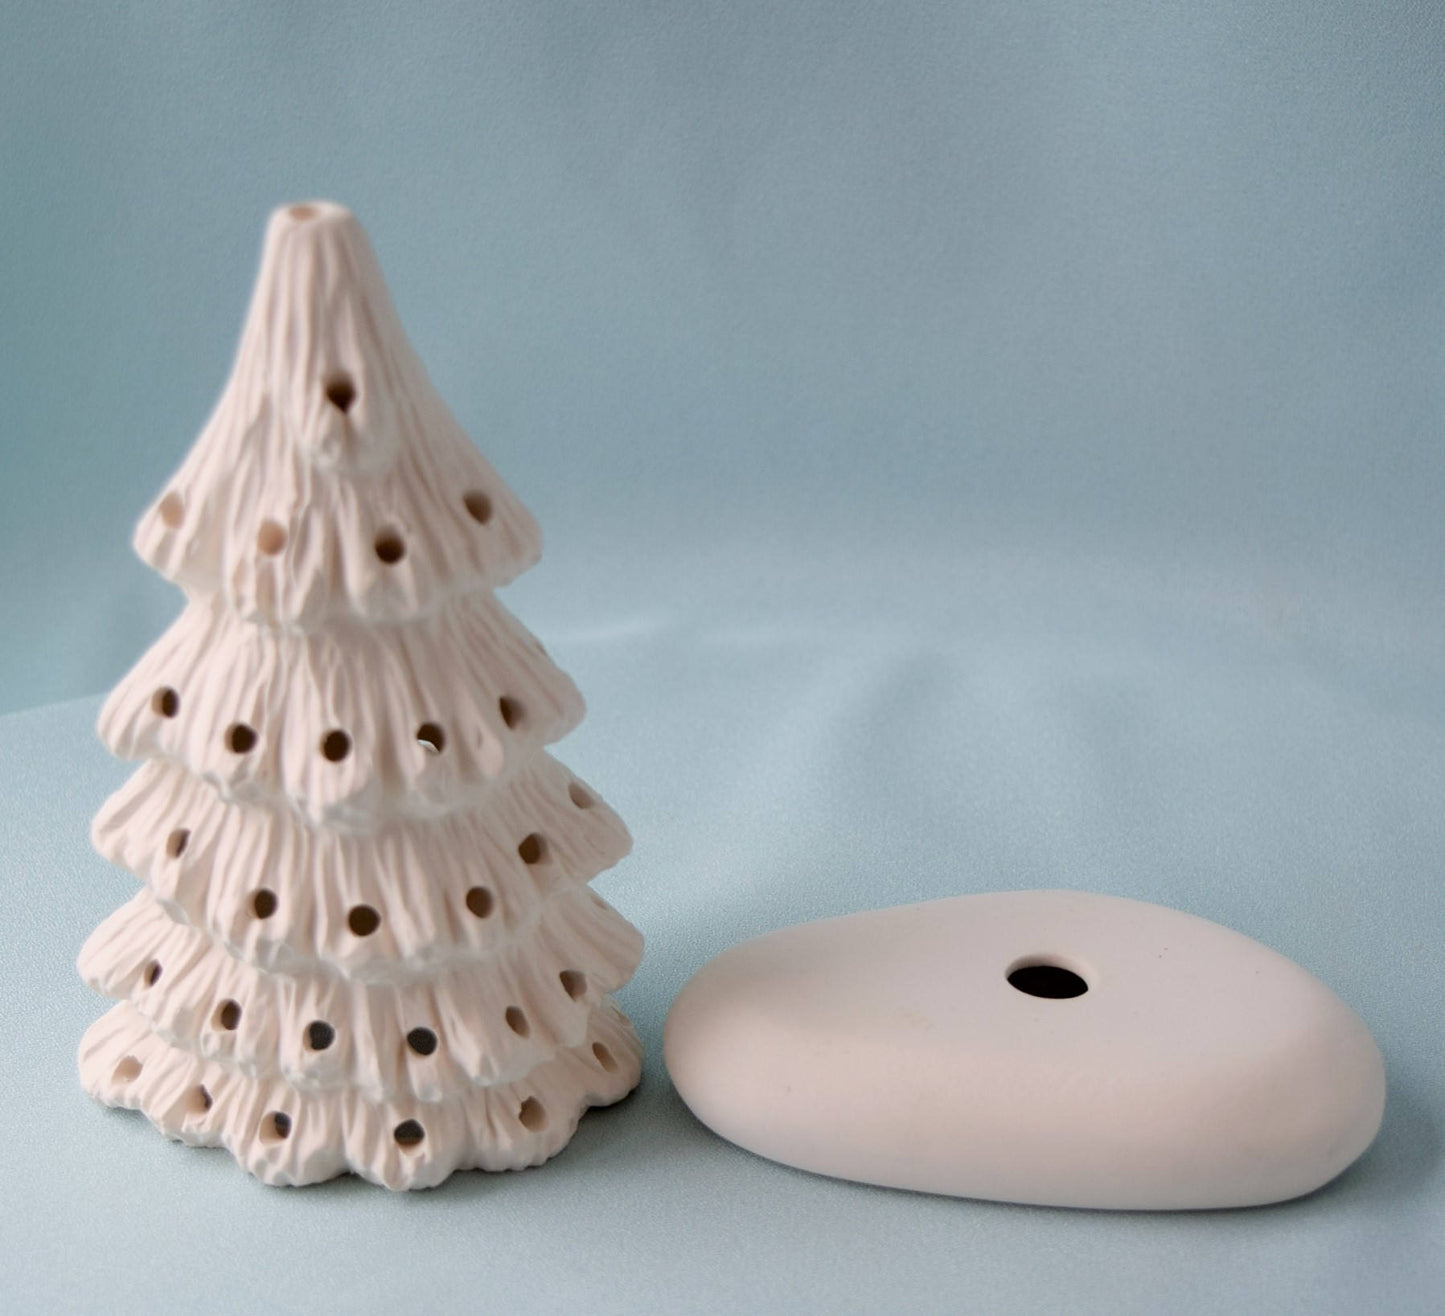 Ceramic Christmas tree in bisque - 5.75 inches tall - DIY